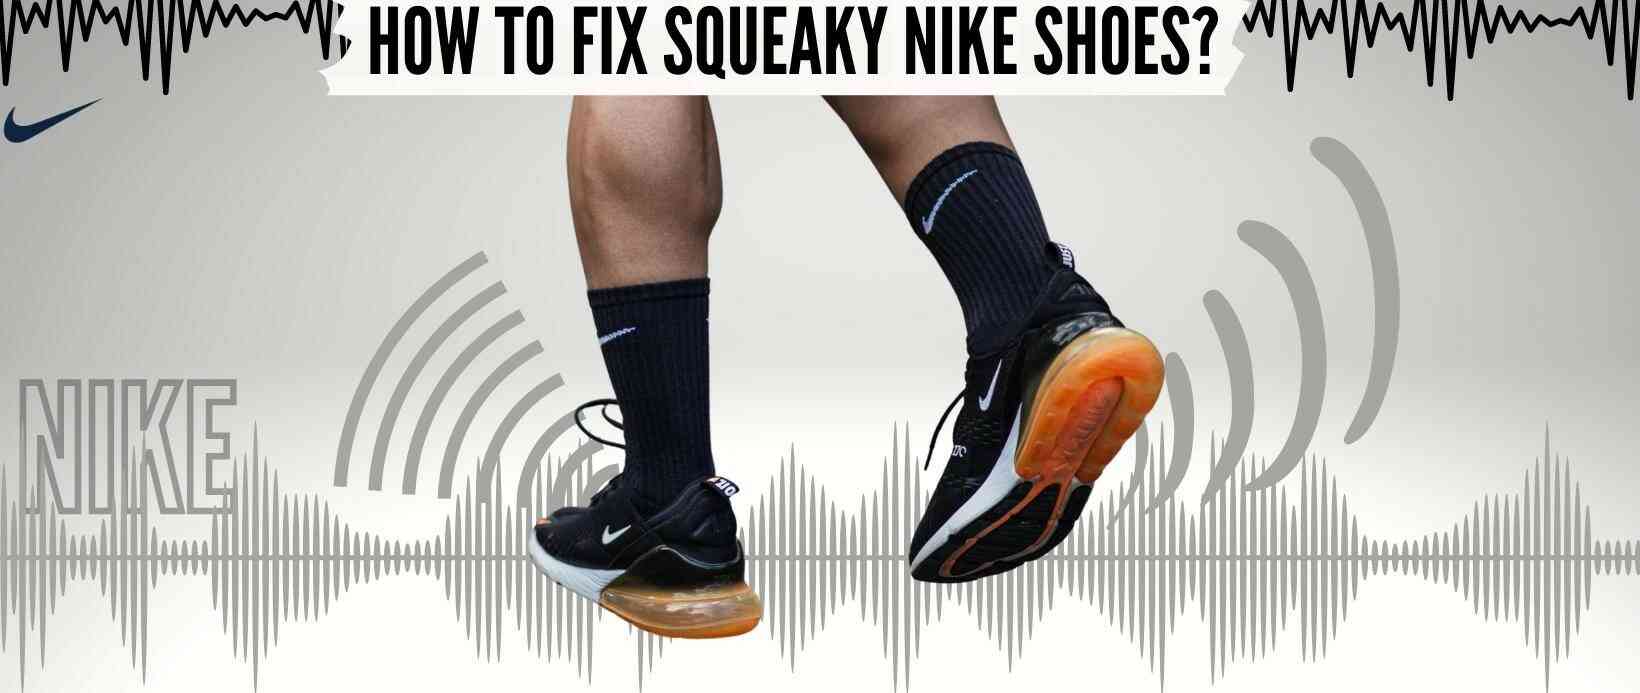 3 Ways to Fix Squeaky Shoes - wikiHow